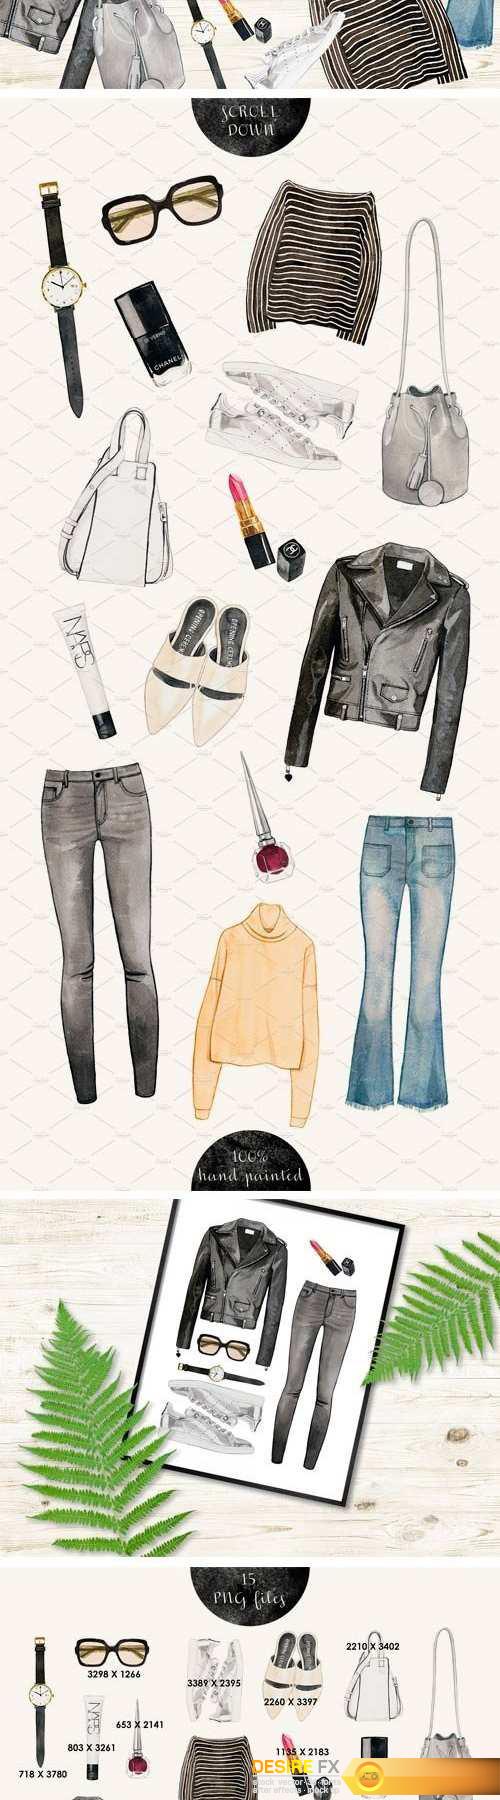 Trendy Fashion Items in Watercolor - 1523968